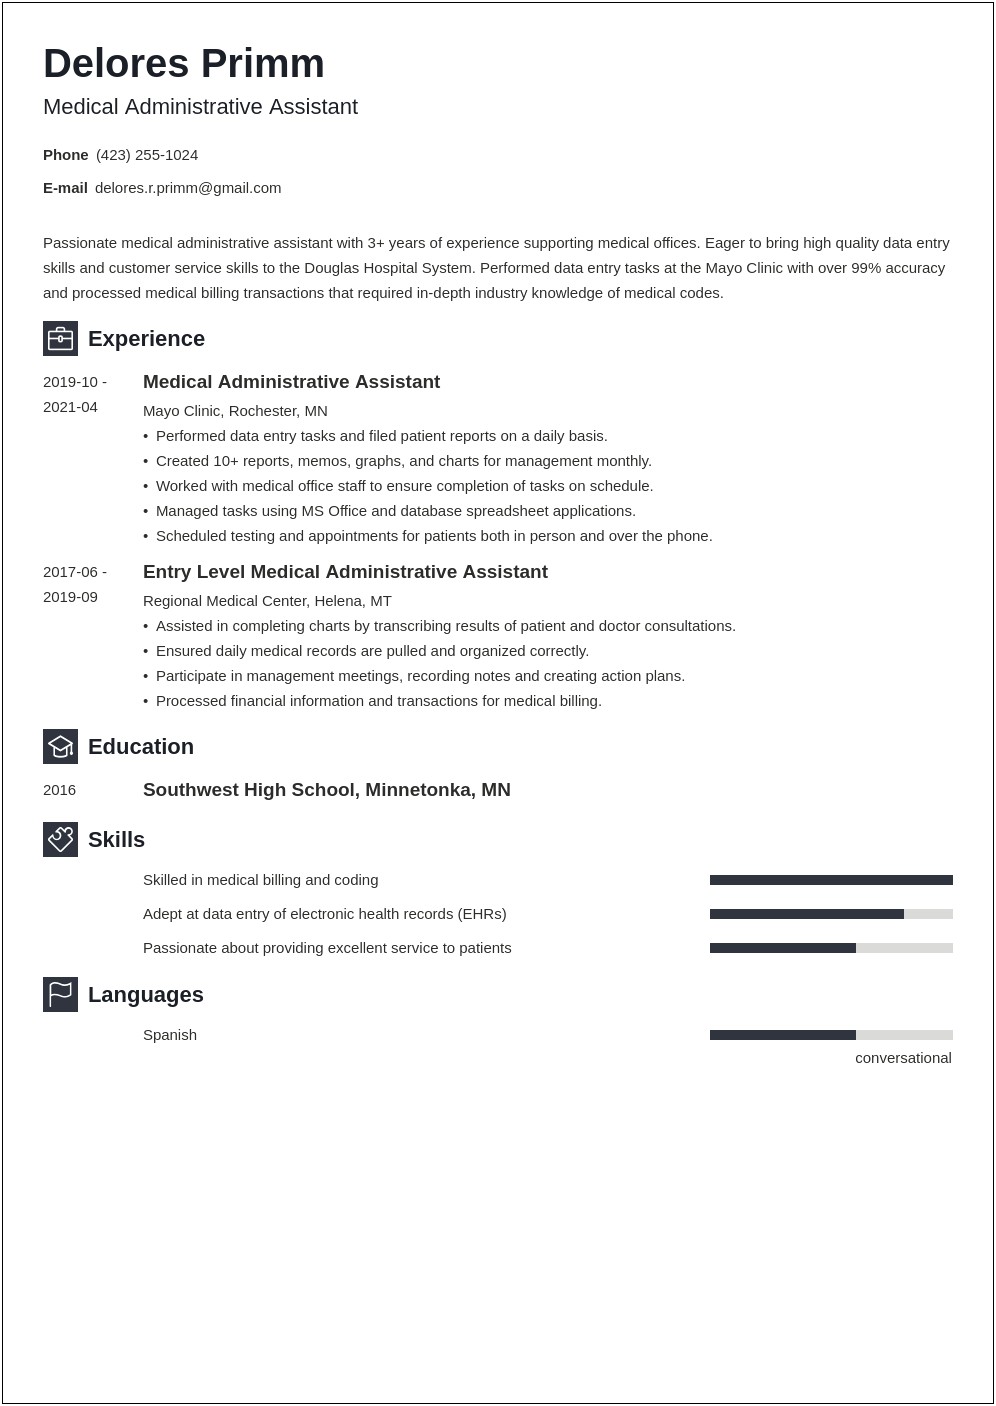 Resume Objectives For Medical Administrative Assistant